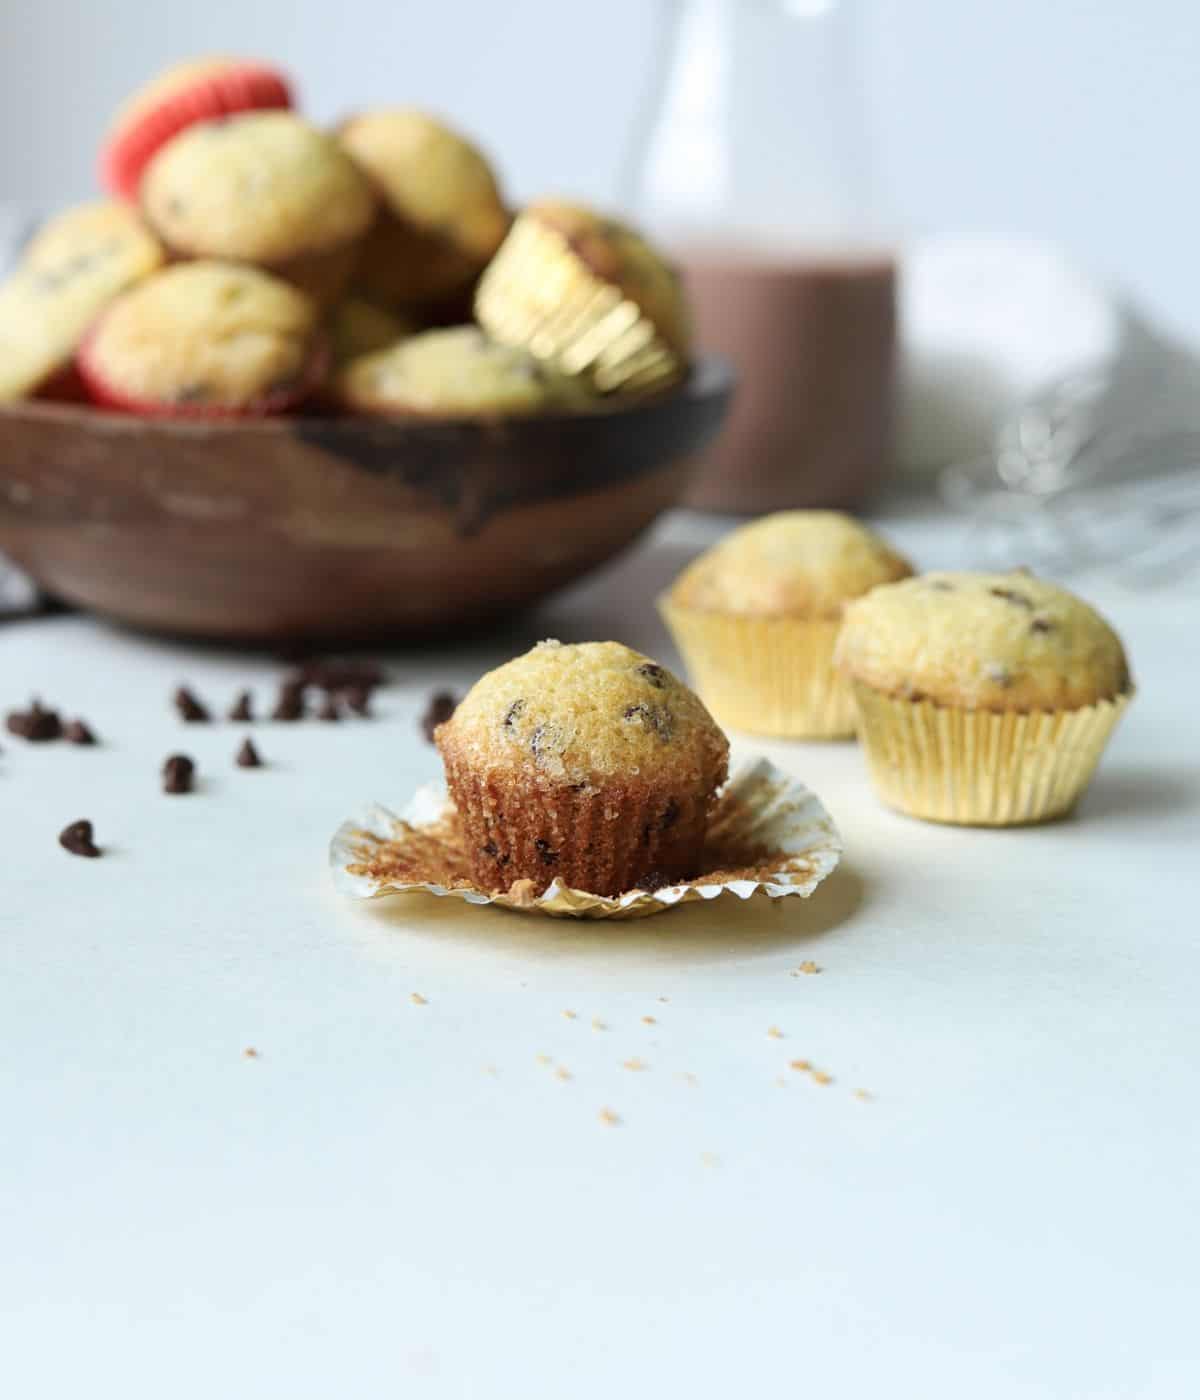 mini chocolate chip muffin in front of bowl full of muffins and chocolate milk container